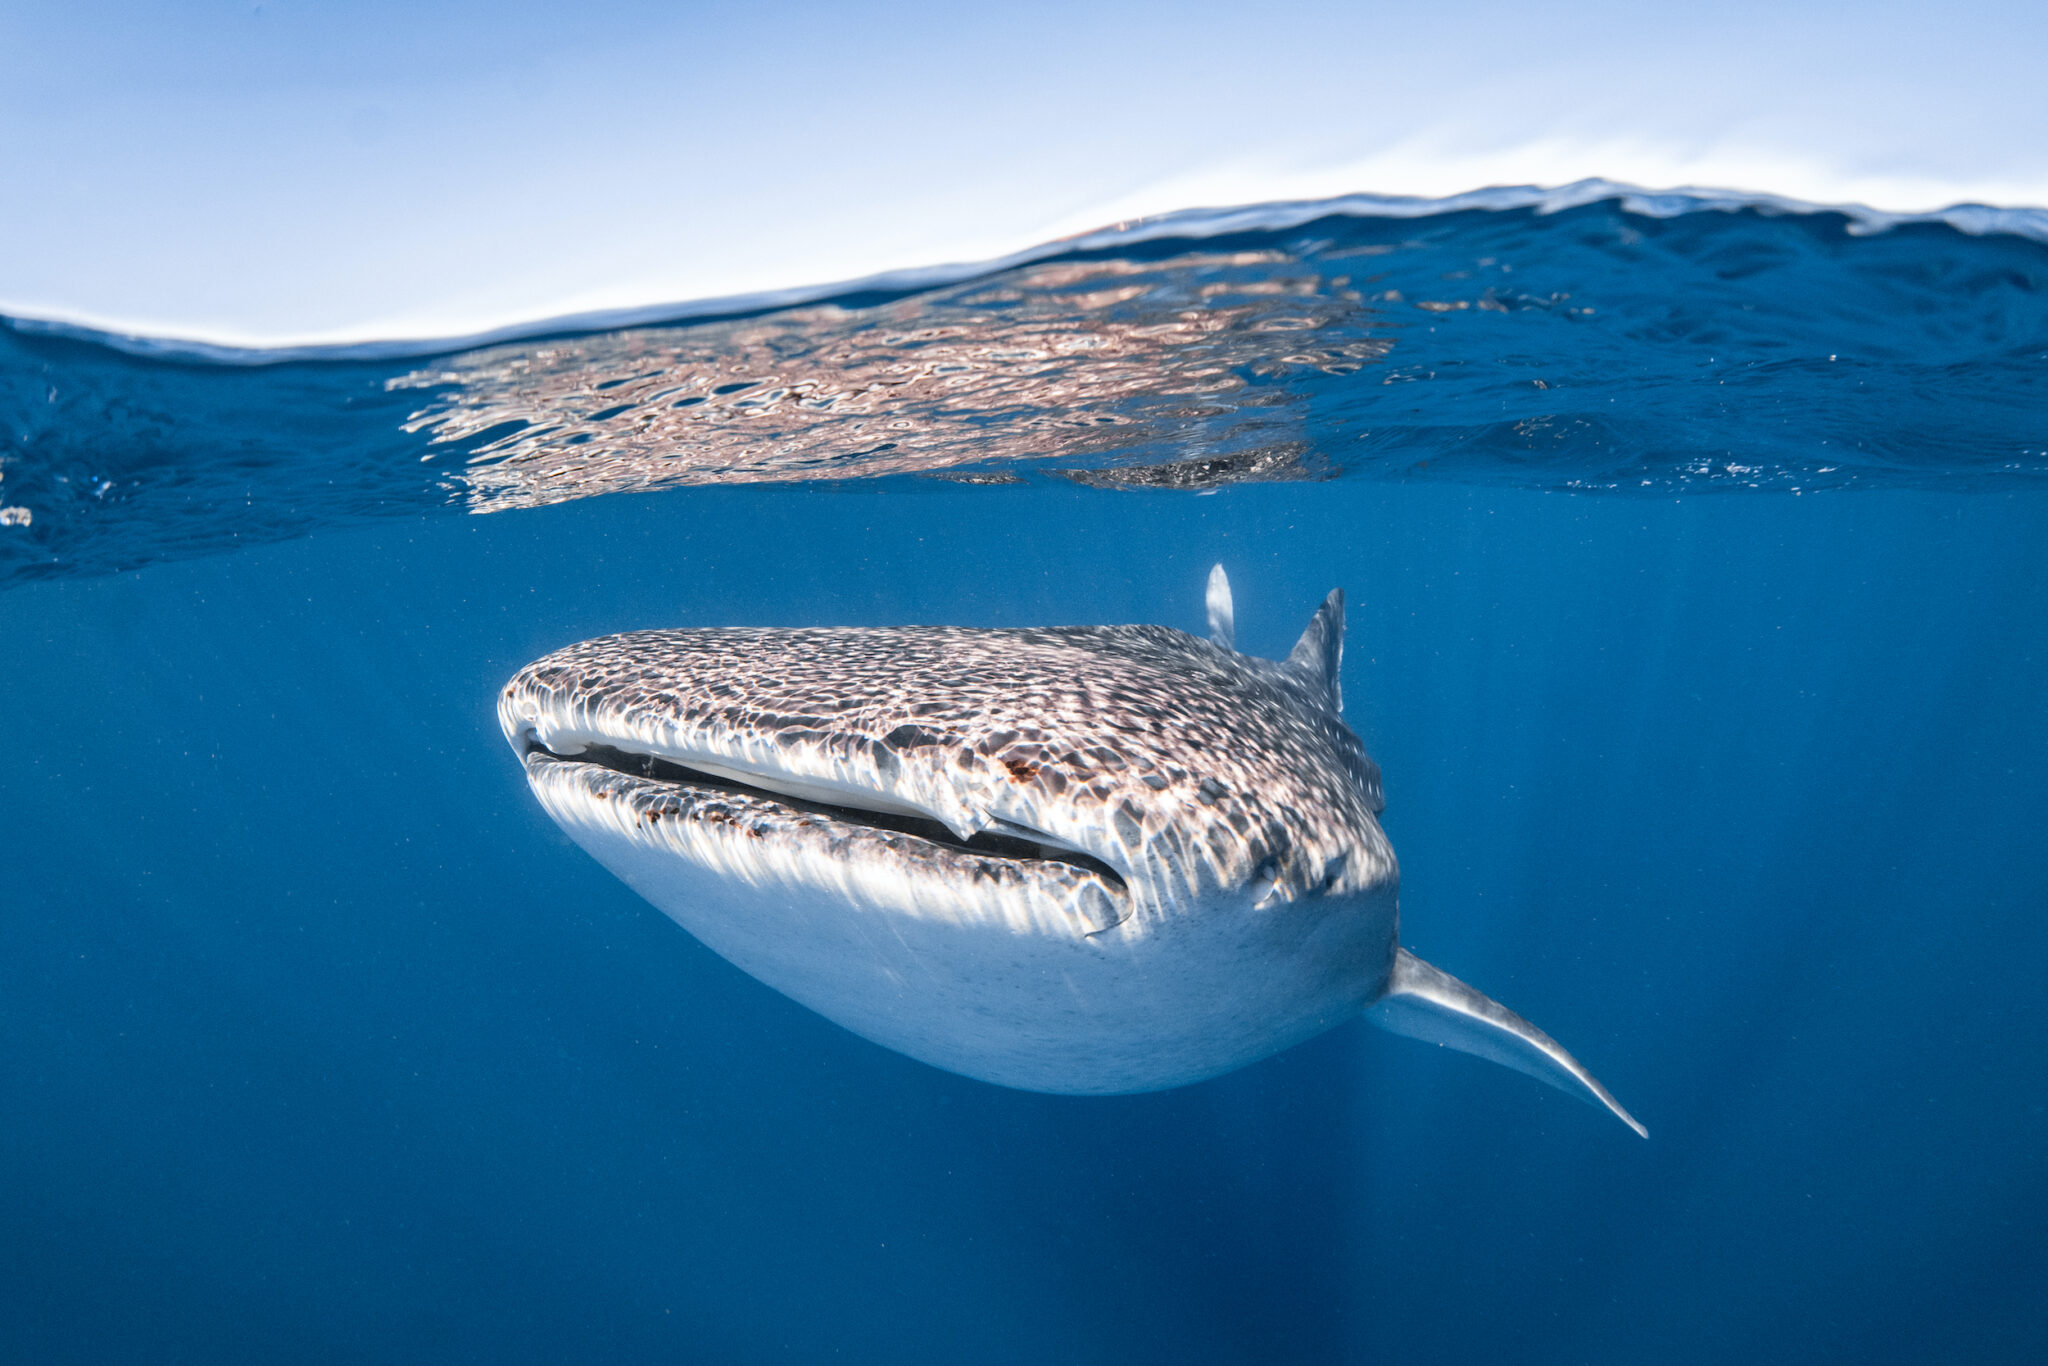 A whale shark swims just beneath the surface at Ningaloo Reef, Western Australia